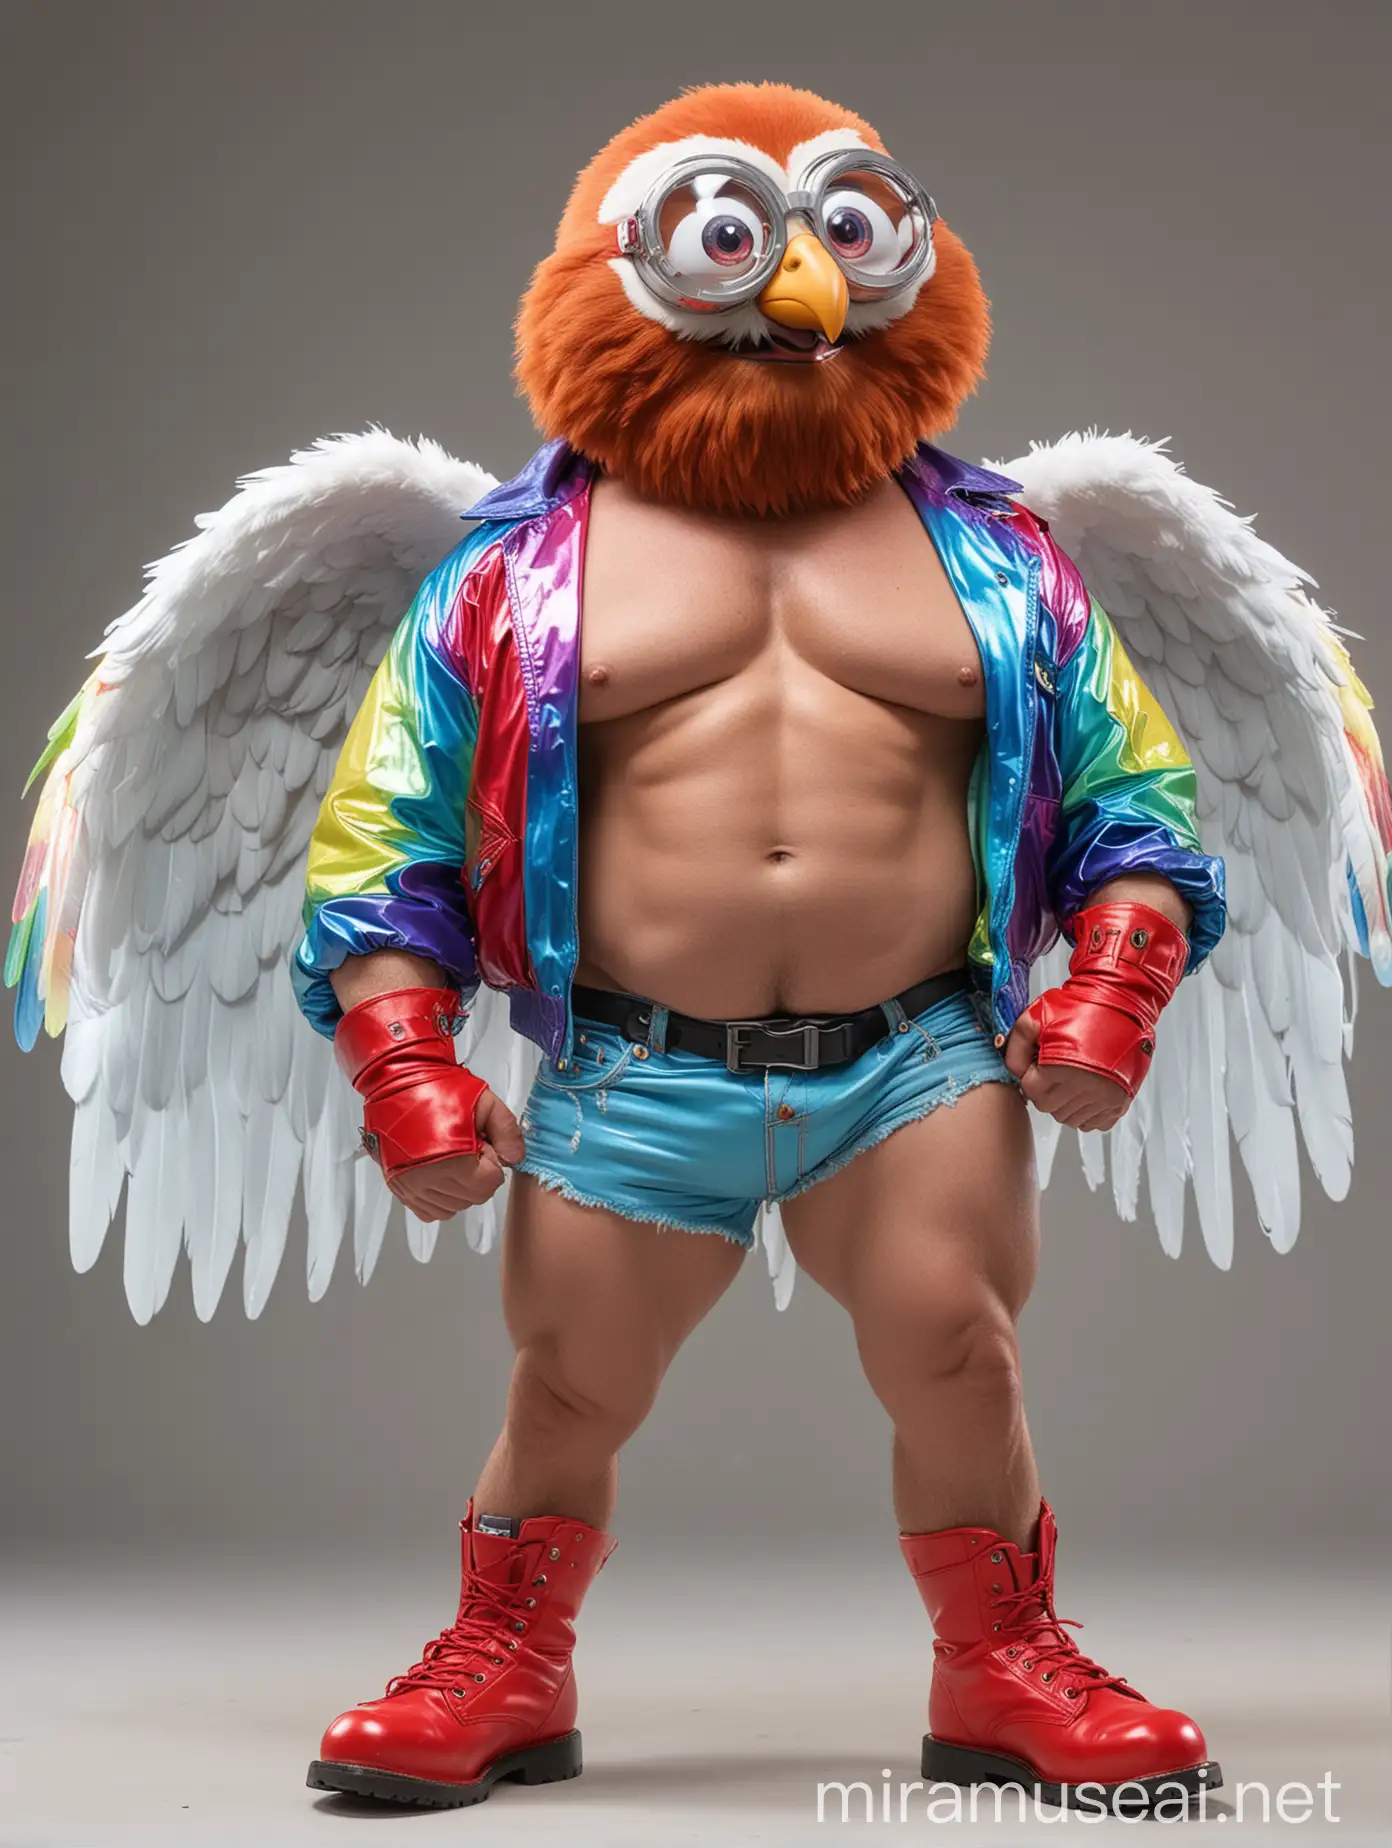 Big Eyes Topless 40s Ultra beefy Red Head Bodybuilder Daddy with Beard Wearing Multi-Highlighter Bright Rainbow Colored See Through huge Eagle Wings Shoulder Jacket short shorts long legs short boots and Flexing his Big Strong Arm Up with Doraemon Goggles on forehead side pose